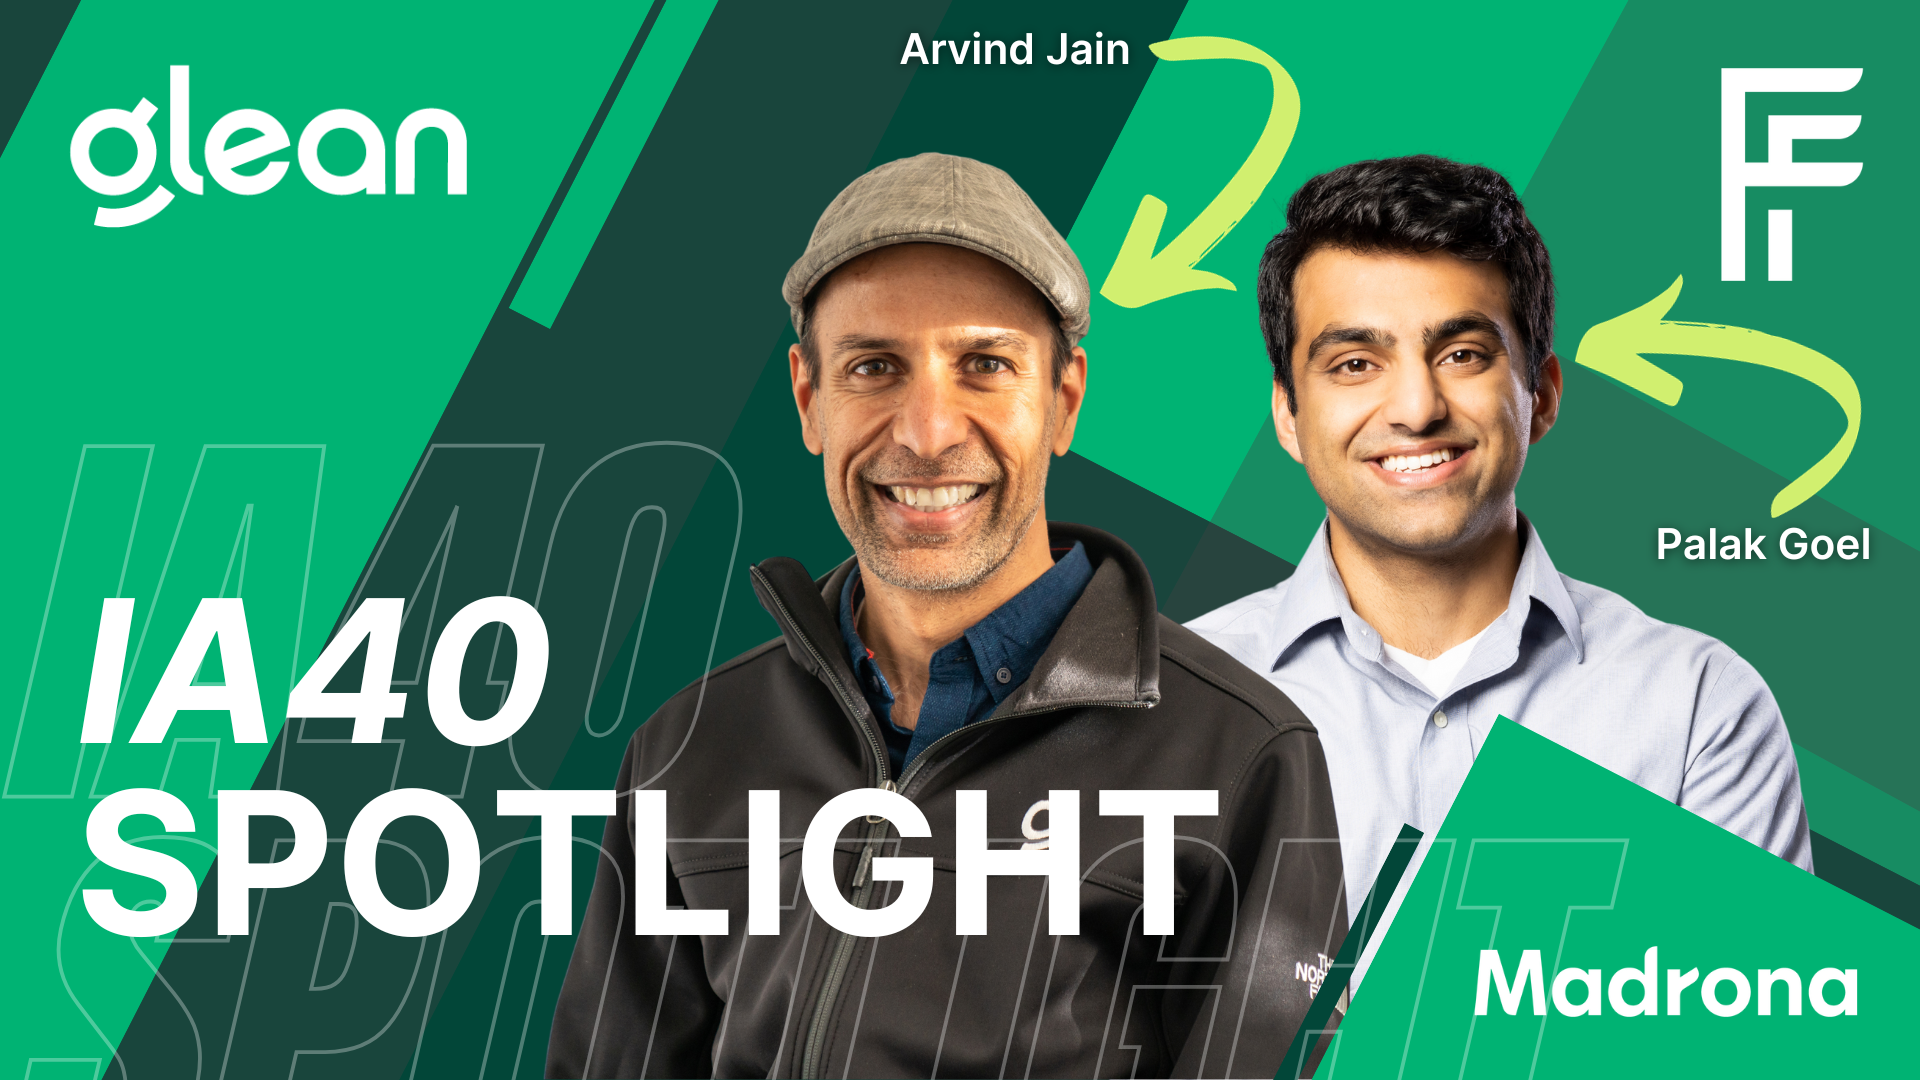 Madrona investor Palak Goel has the pleasure of chatting with Glean founder and CEO Arvind Jain on the evolution of enterprise AI